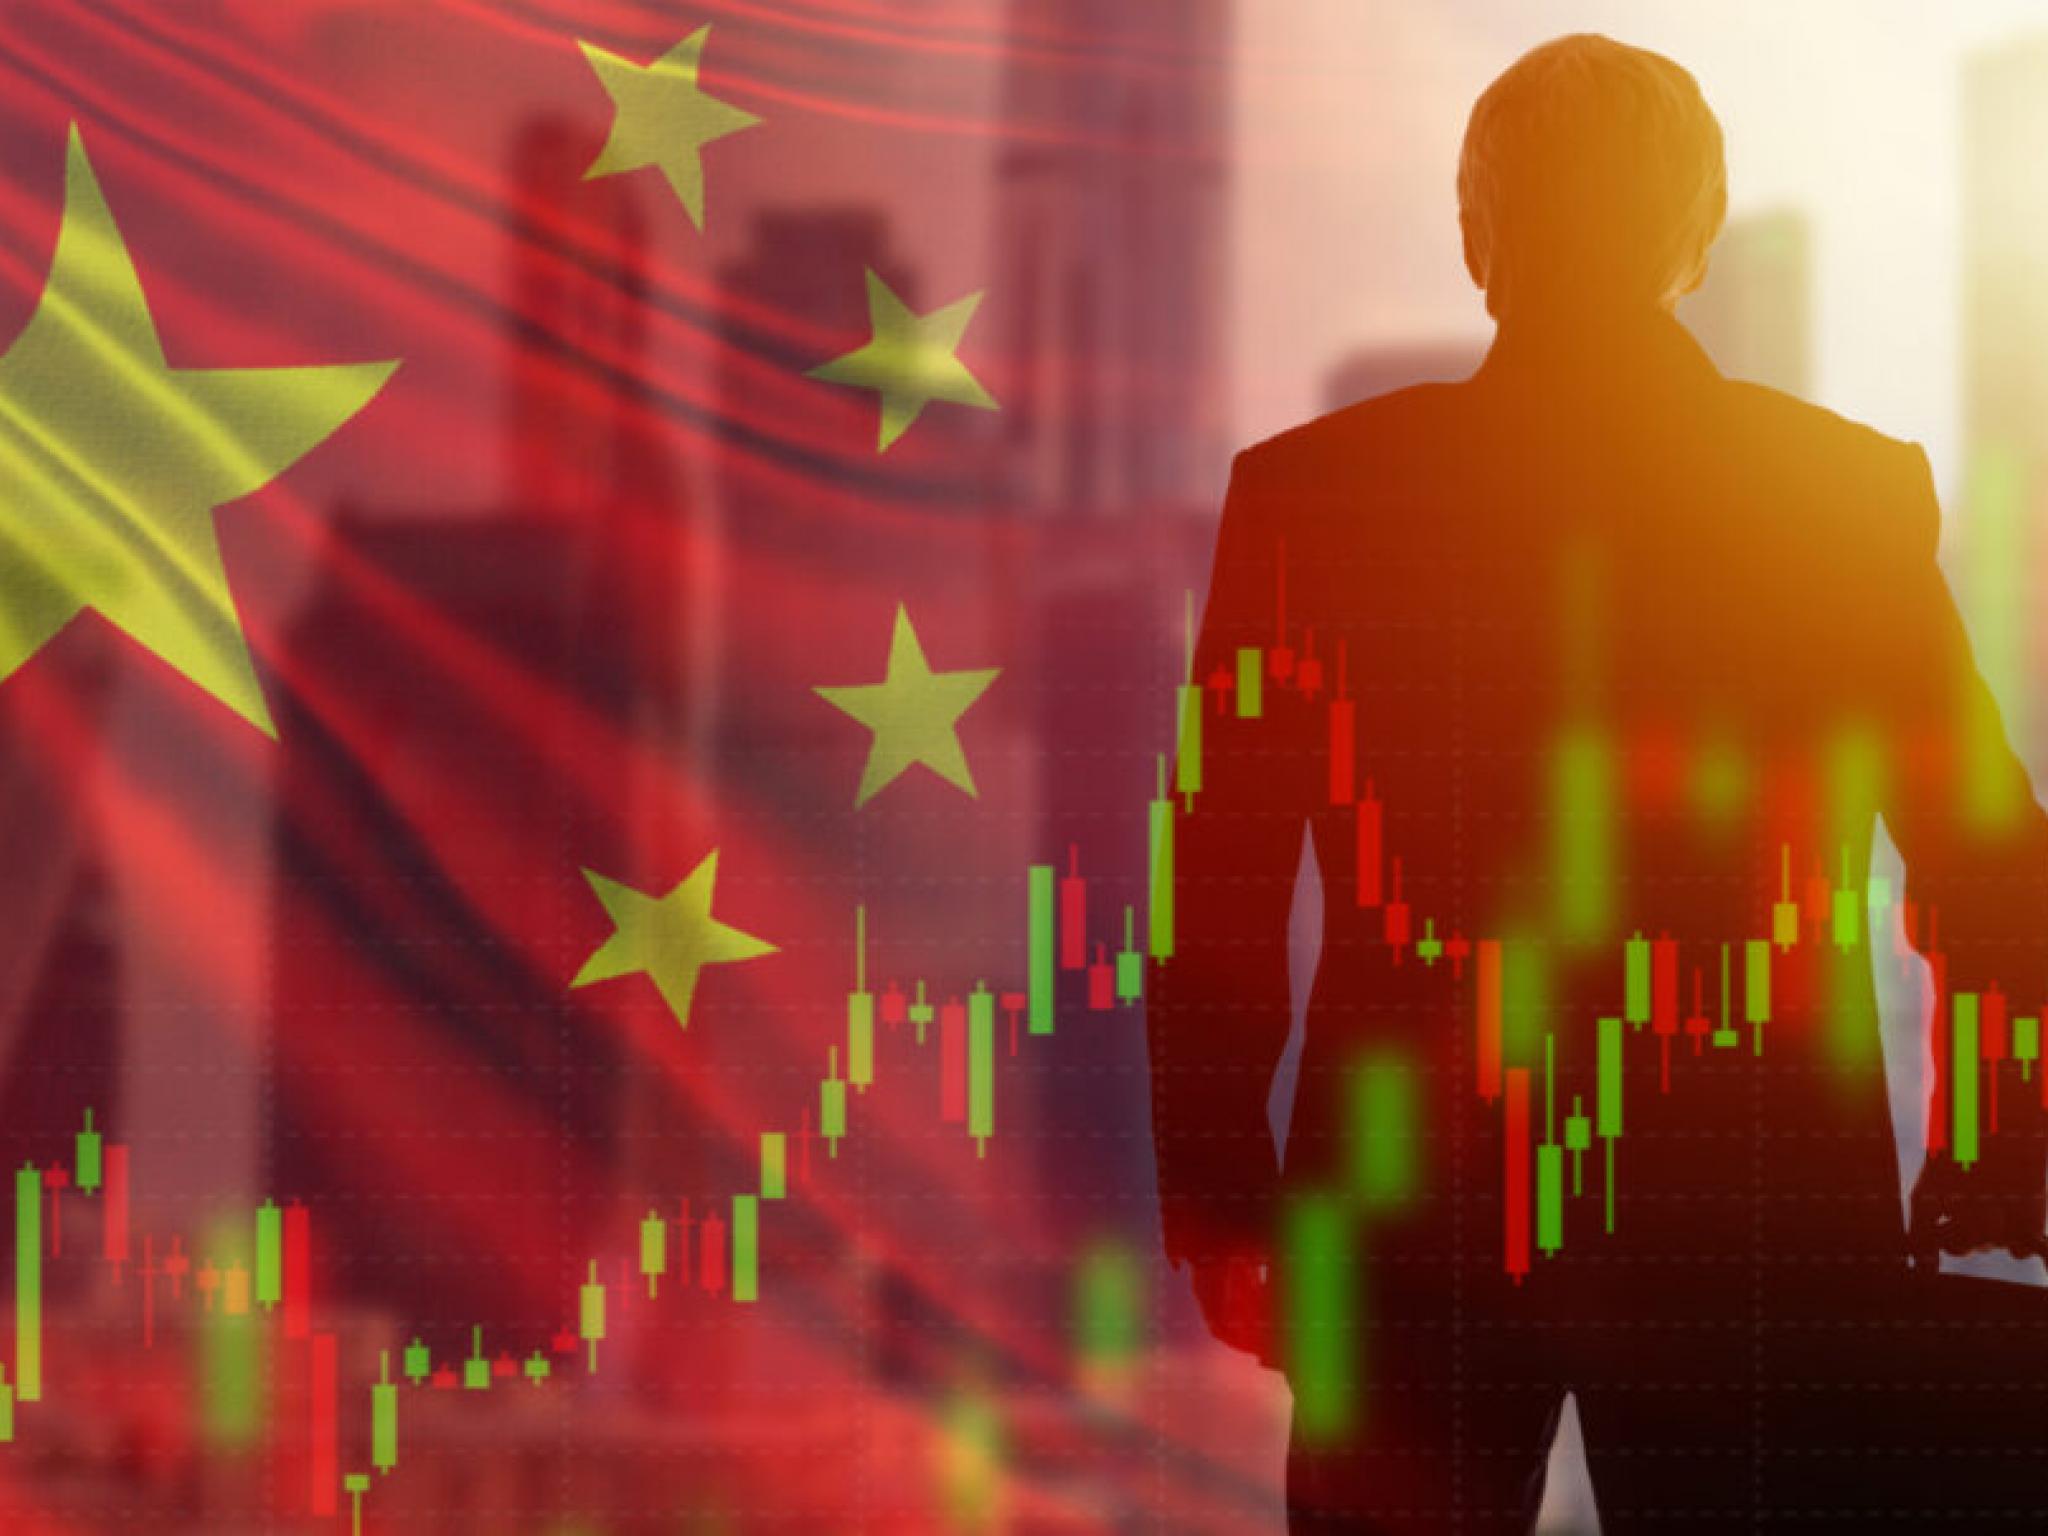  ubs-upgrades-china-stocks-amid-valuation-collapse-what-investors-need-to-know 